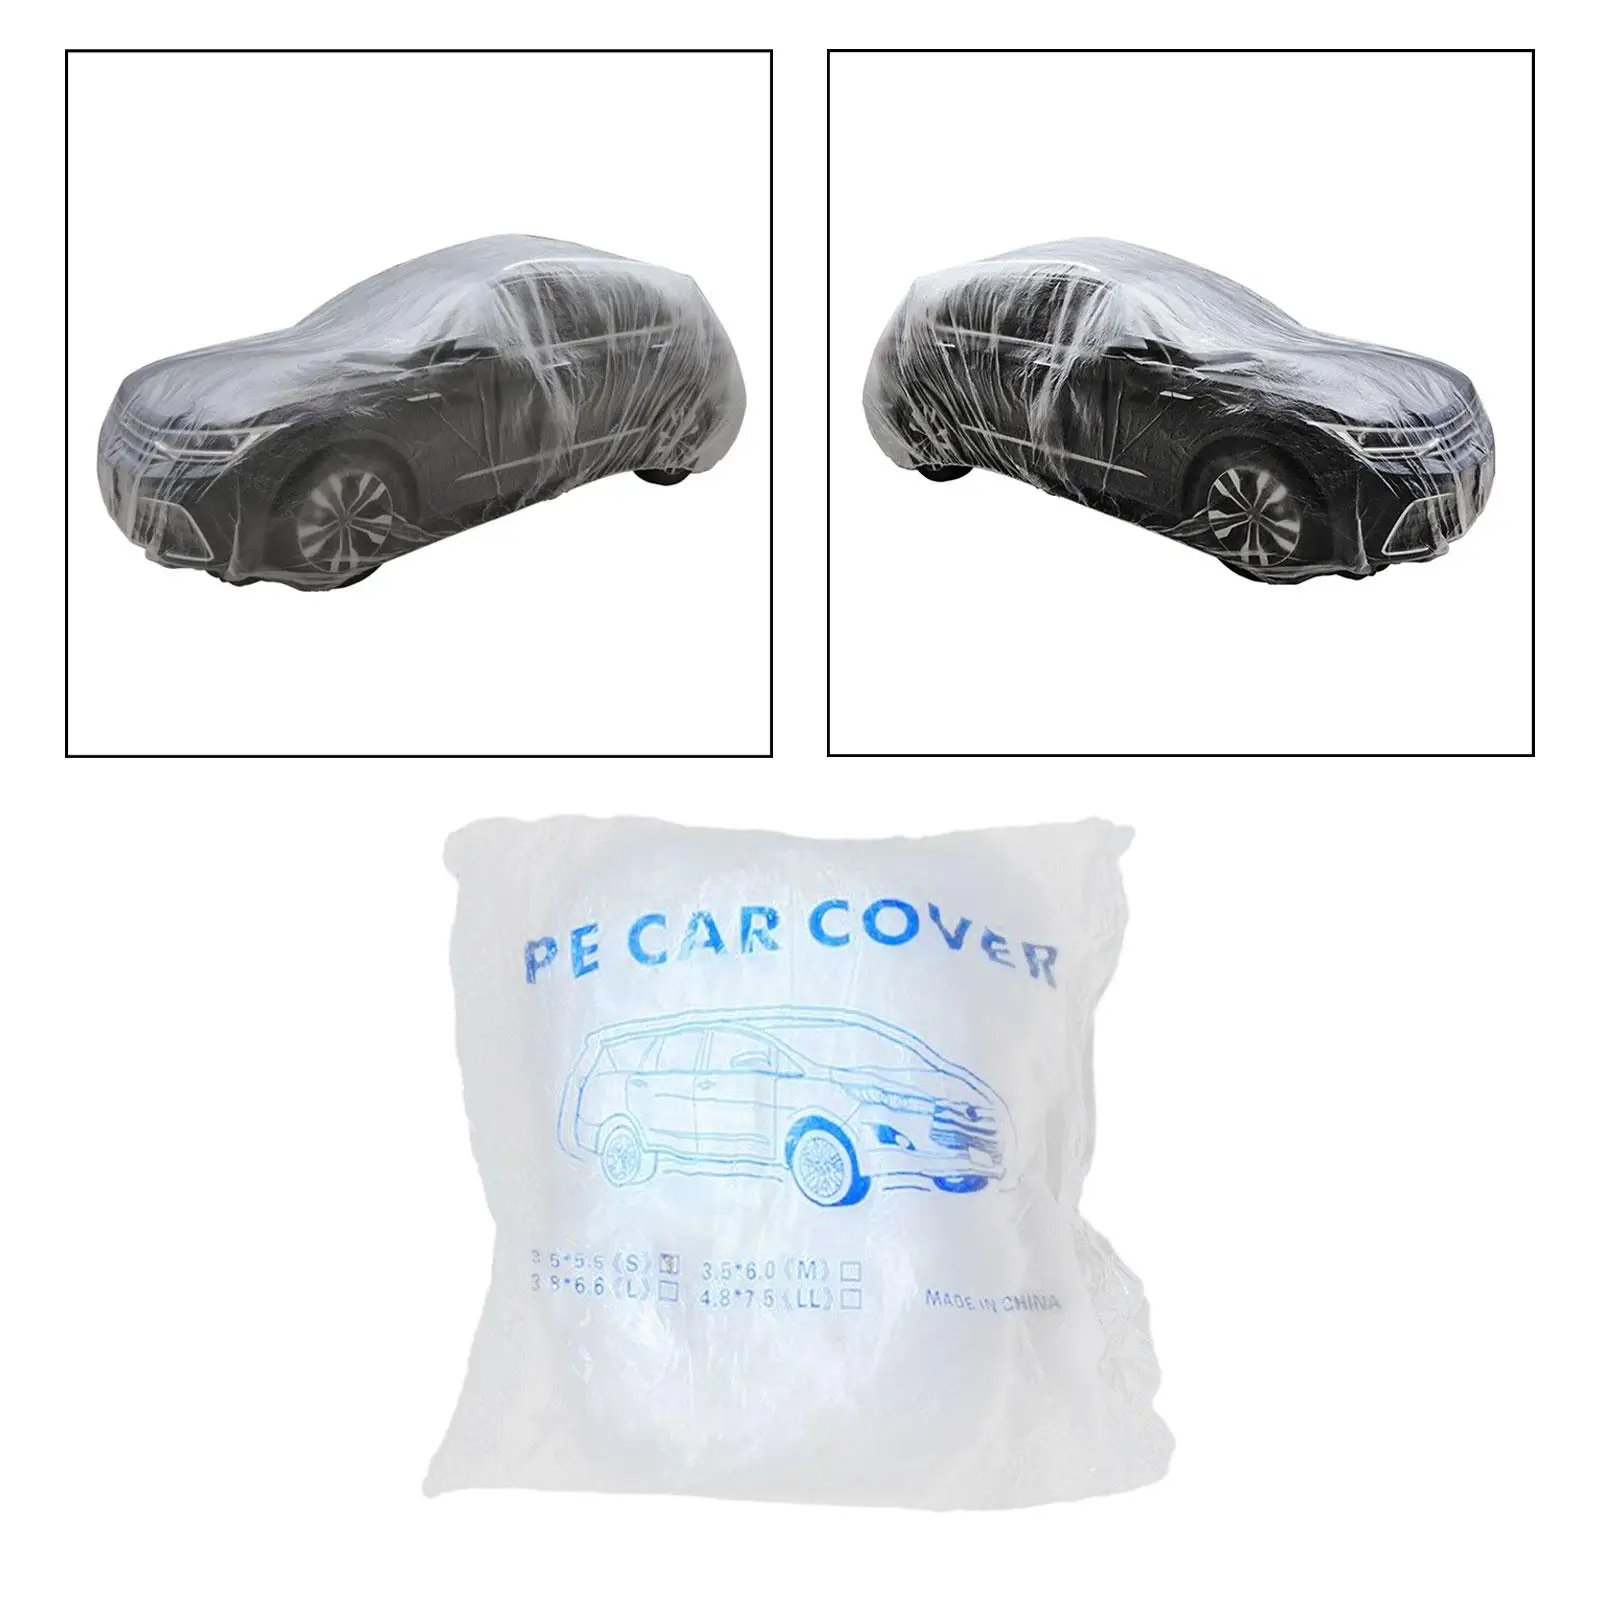 Car Cover Waterproof Protection Garage Weather Automotive Car Clothing Outdoor Full Cover for Automobiles Trucks Sedan